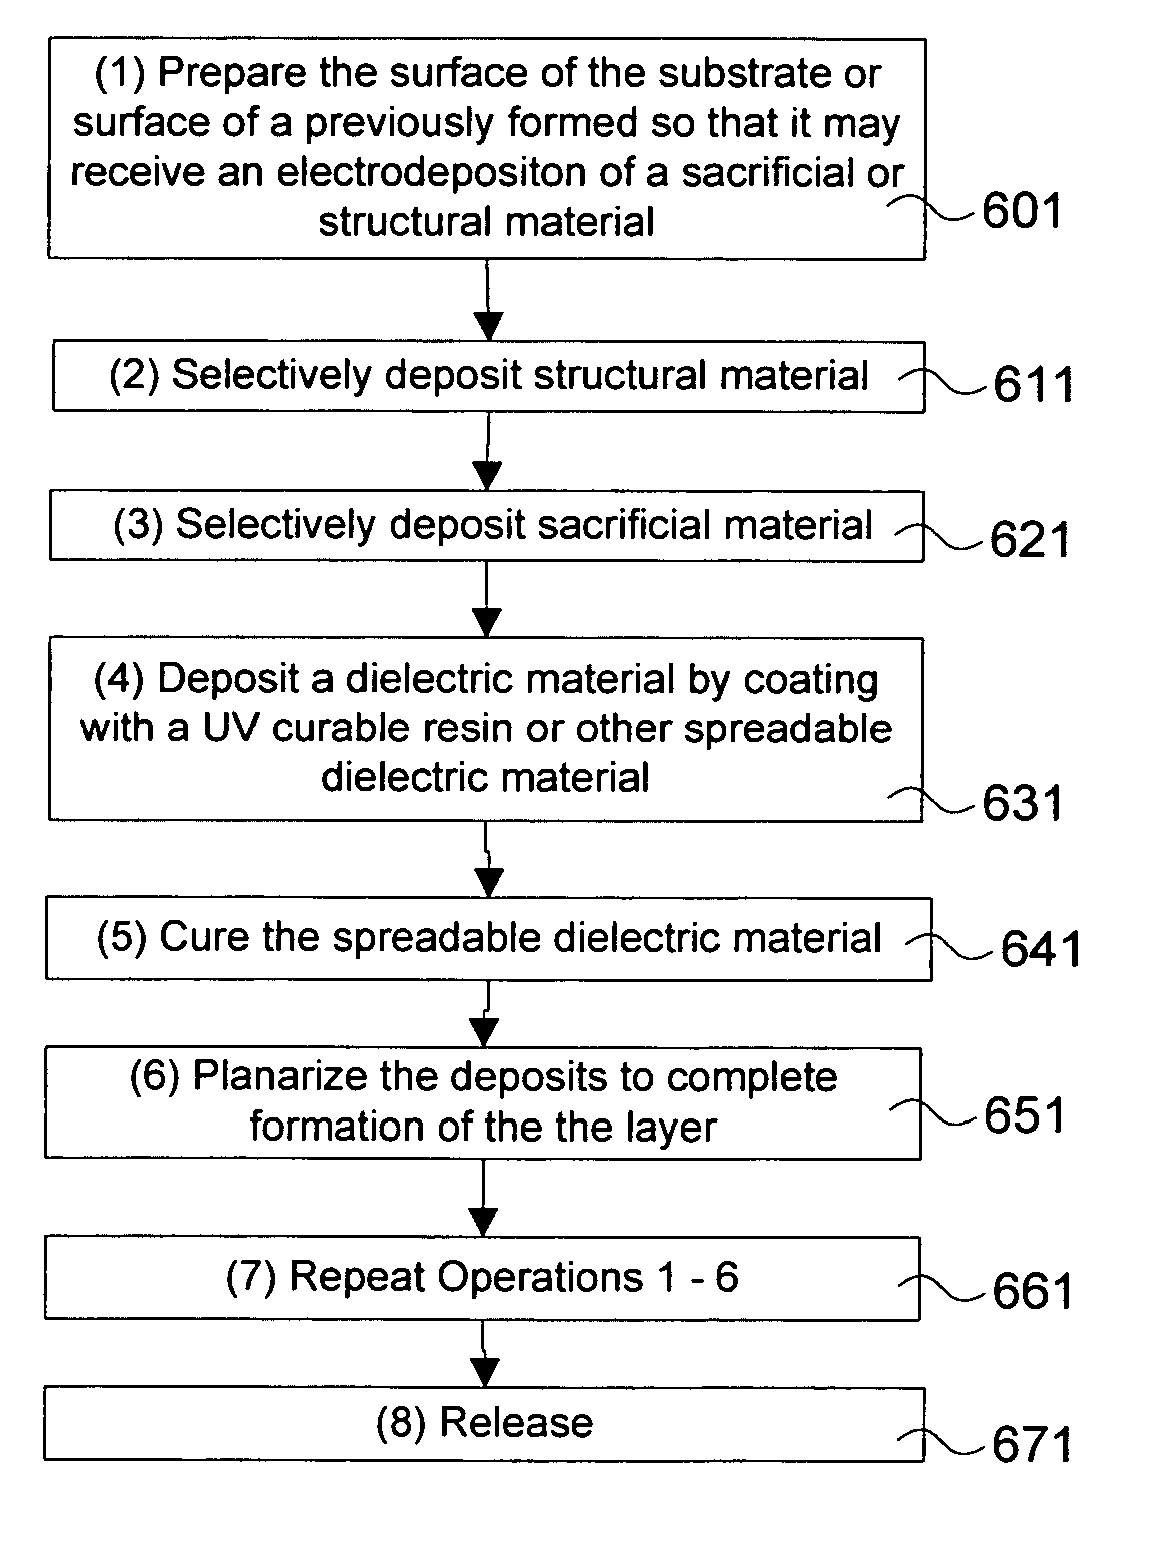 Electrochemical fabrication methods incorporating dielectric materials and/or using dielectric substrates